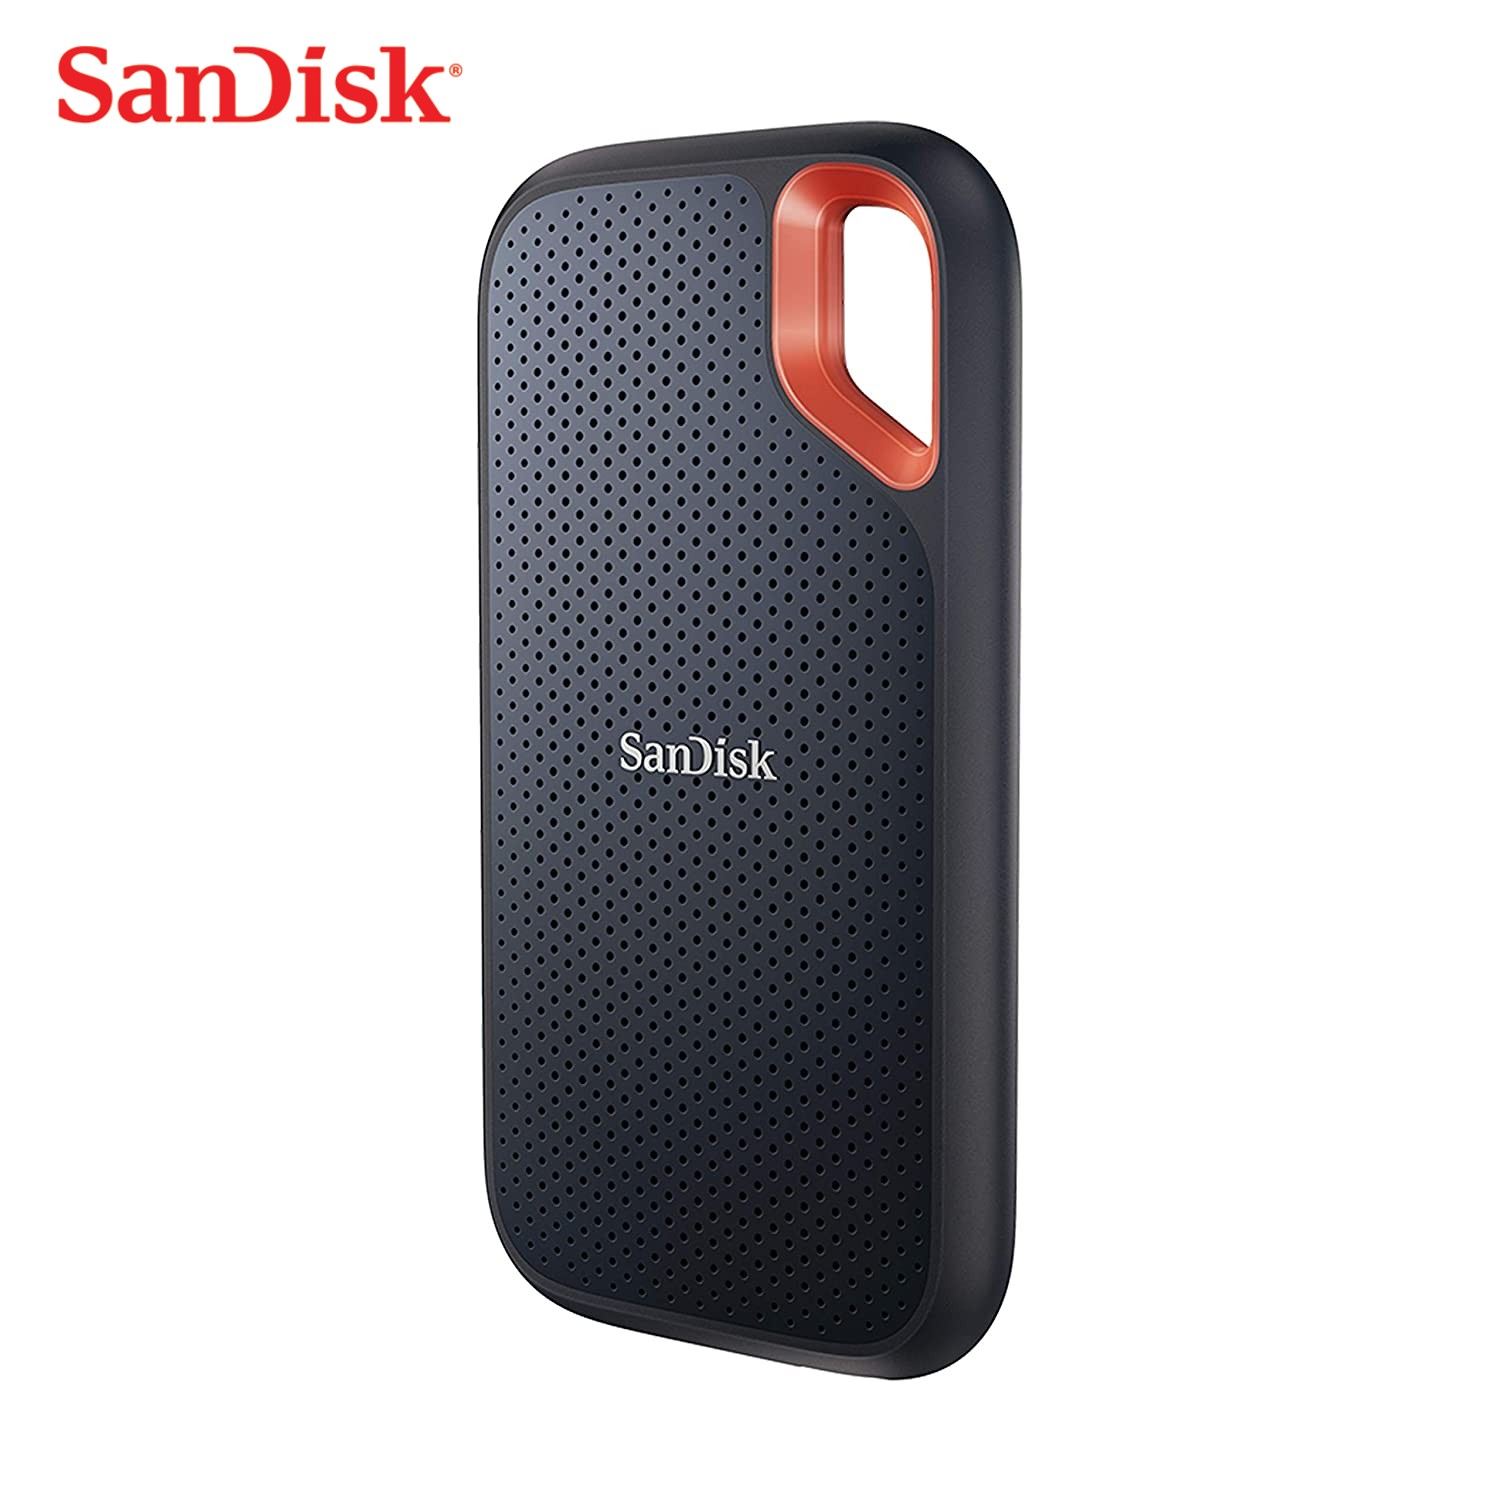 SanDisk 4TB Extreme Portable External SSD  - Up to 1050MB/s